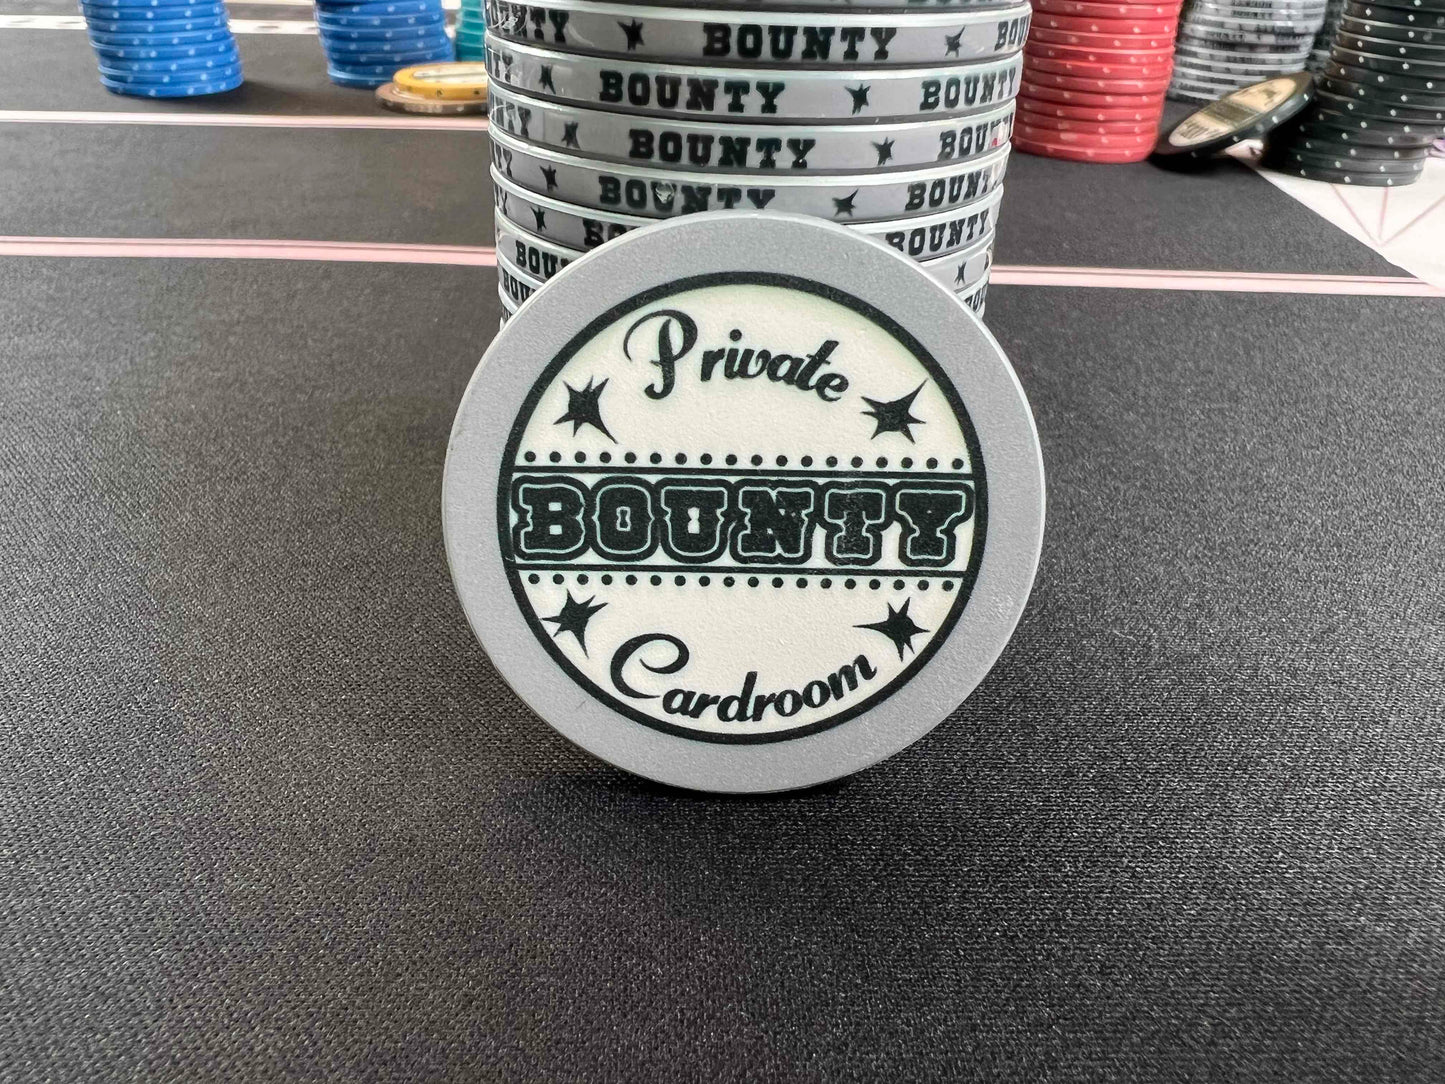 Private Cardroom Bounty Chips [43mm]